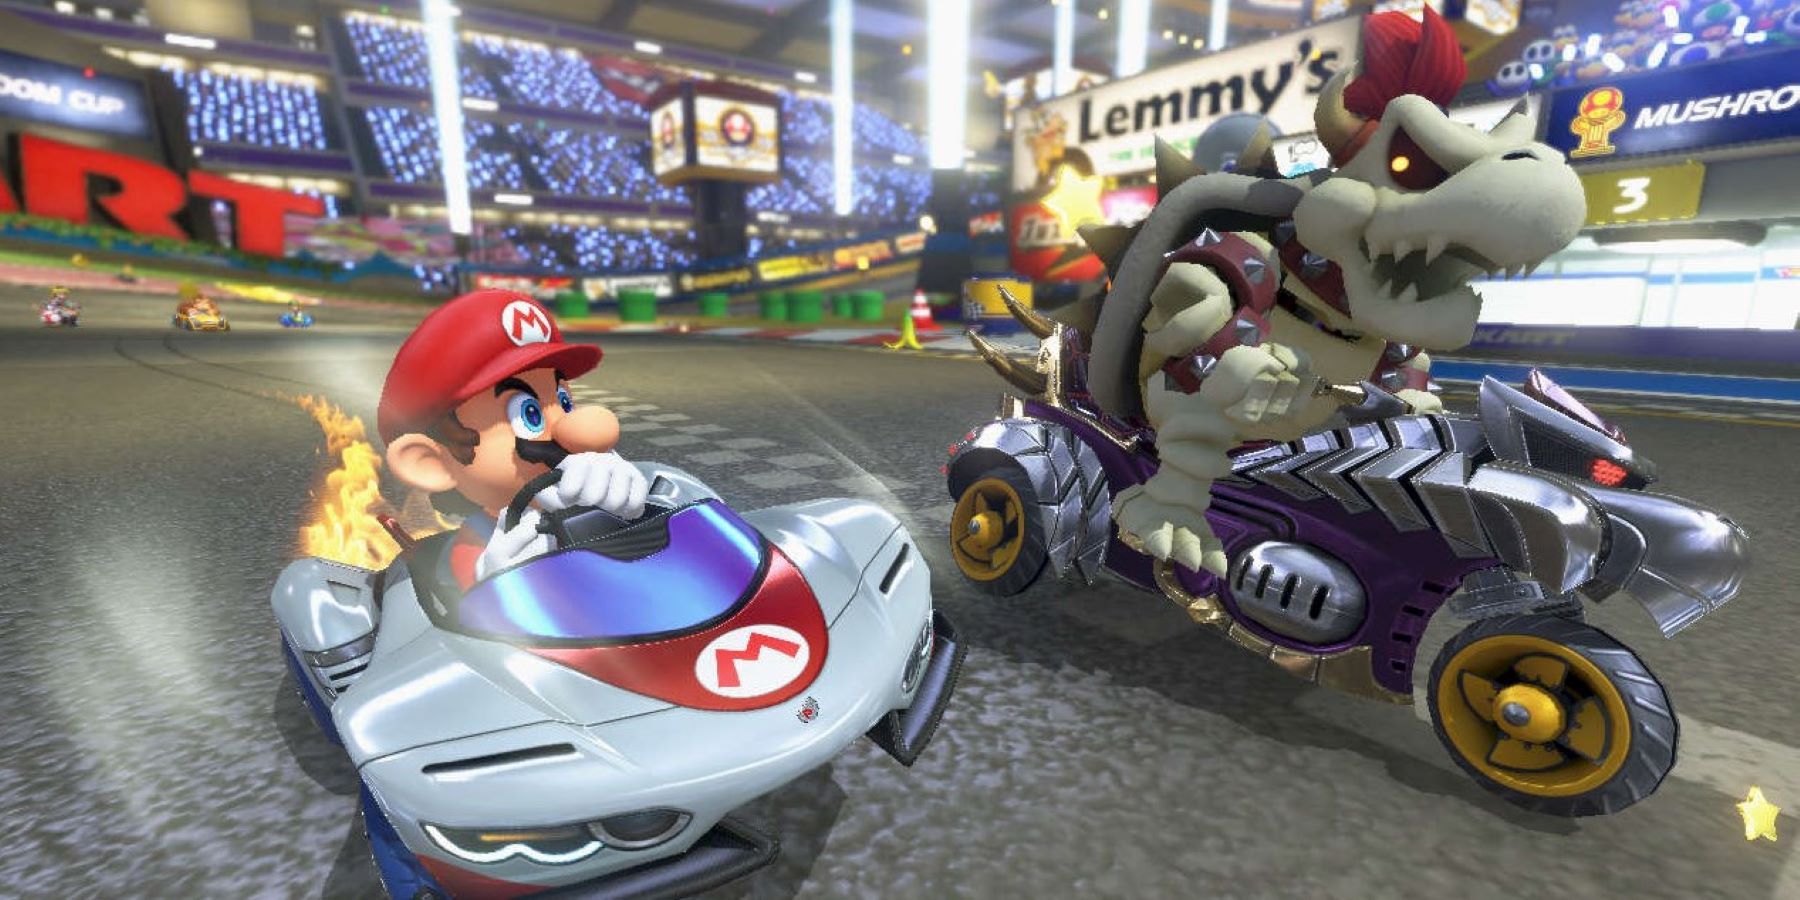 Mario and Dry Bowser racing next to each other in Mario Kart 8 Deluxe